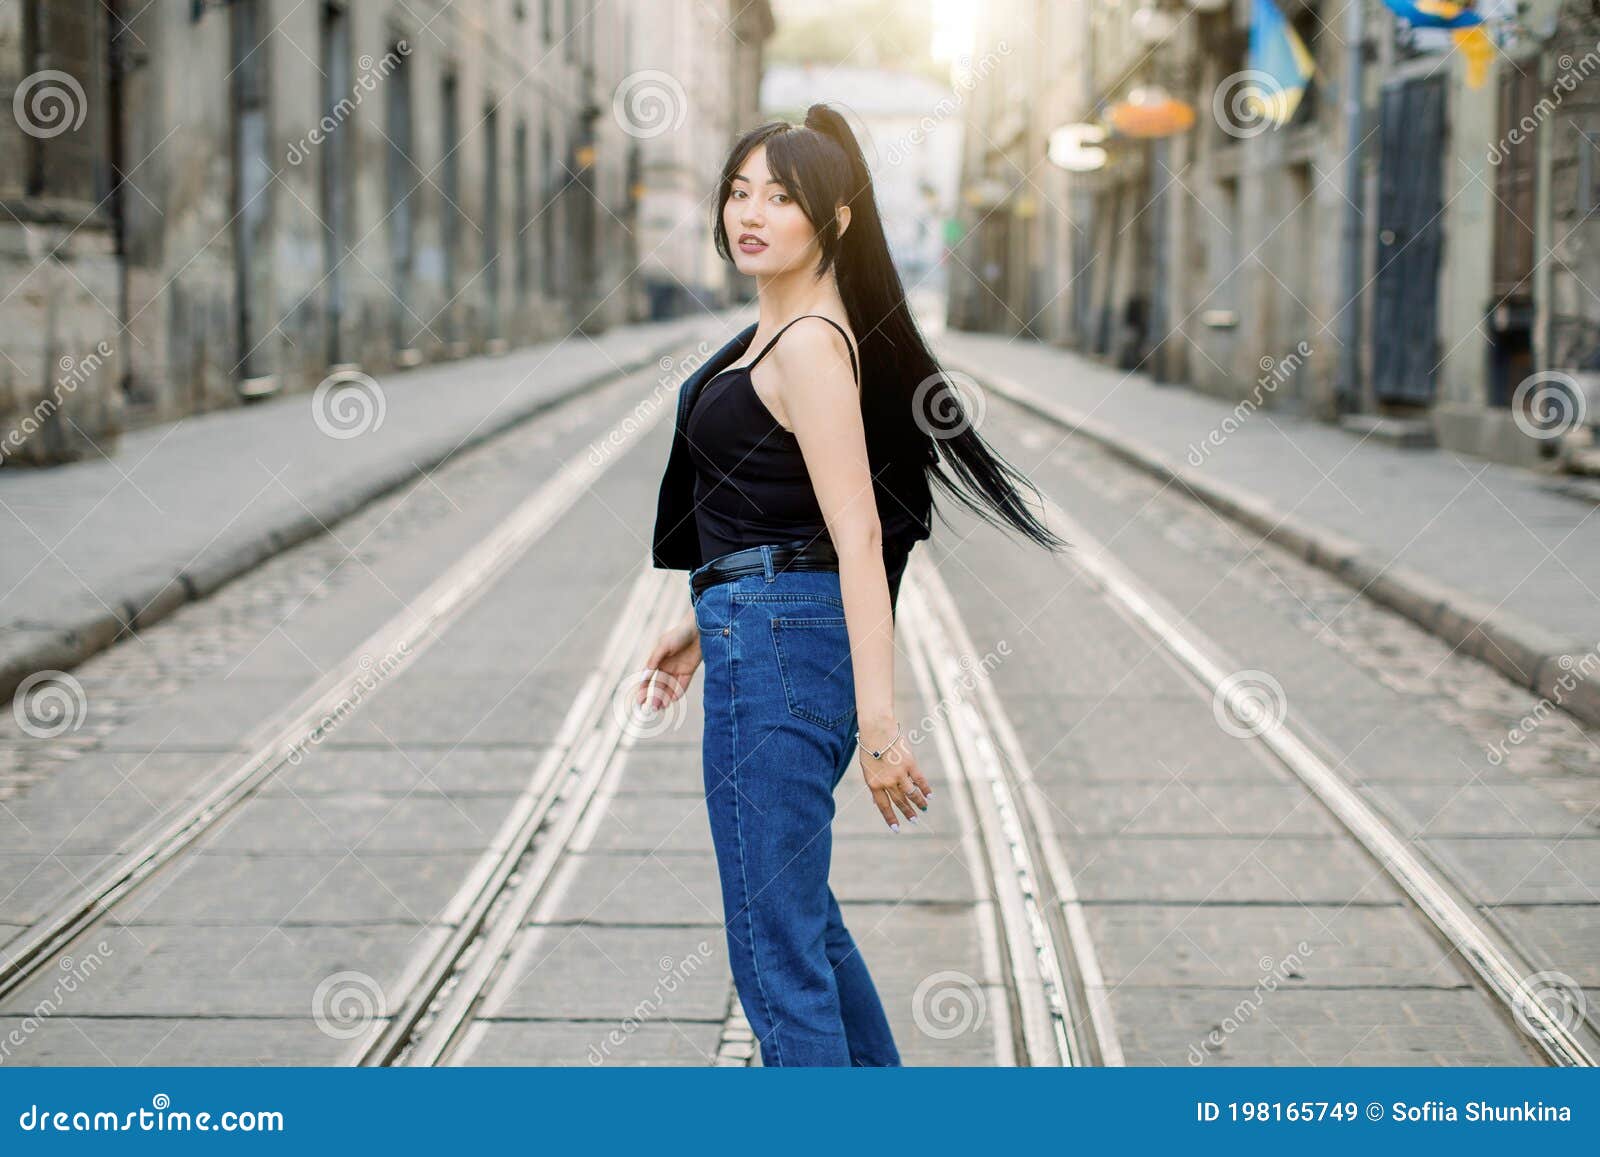 Young Beautiful Asian Girl with Ponytail Black Hair, Wearing Casual Jeans  and Black Top, Turning To Camera and Posing Stock Image - Image of city,  jacket: 198165749